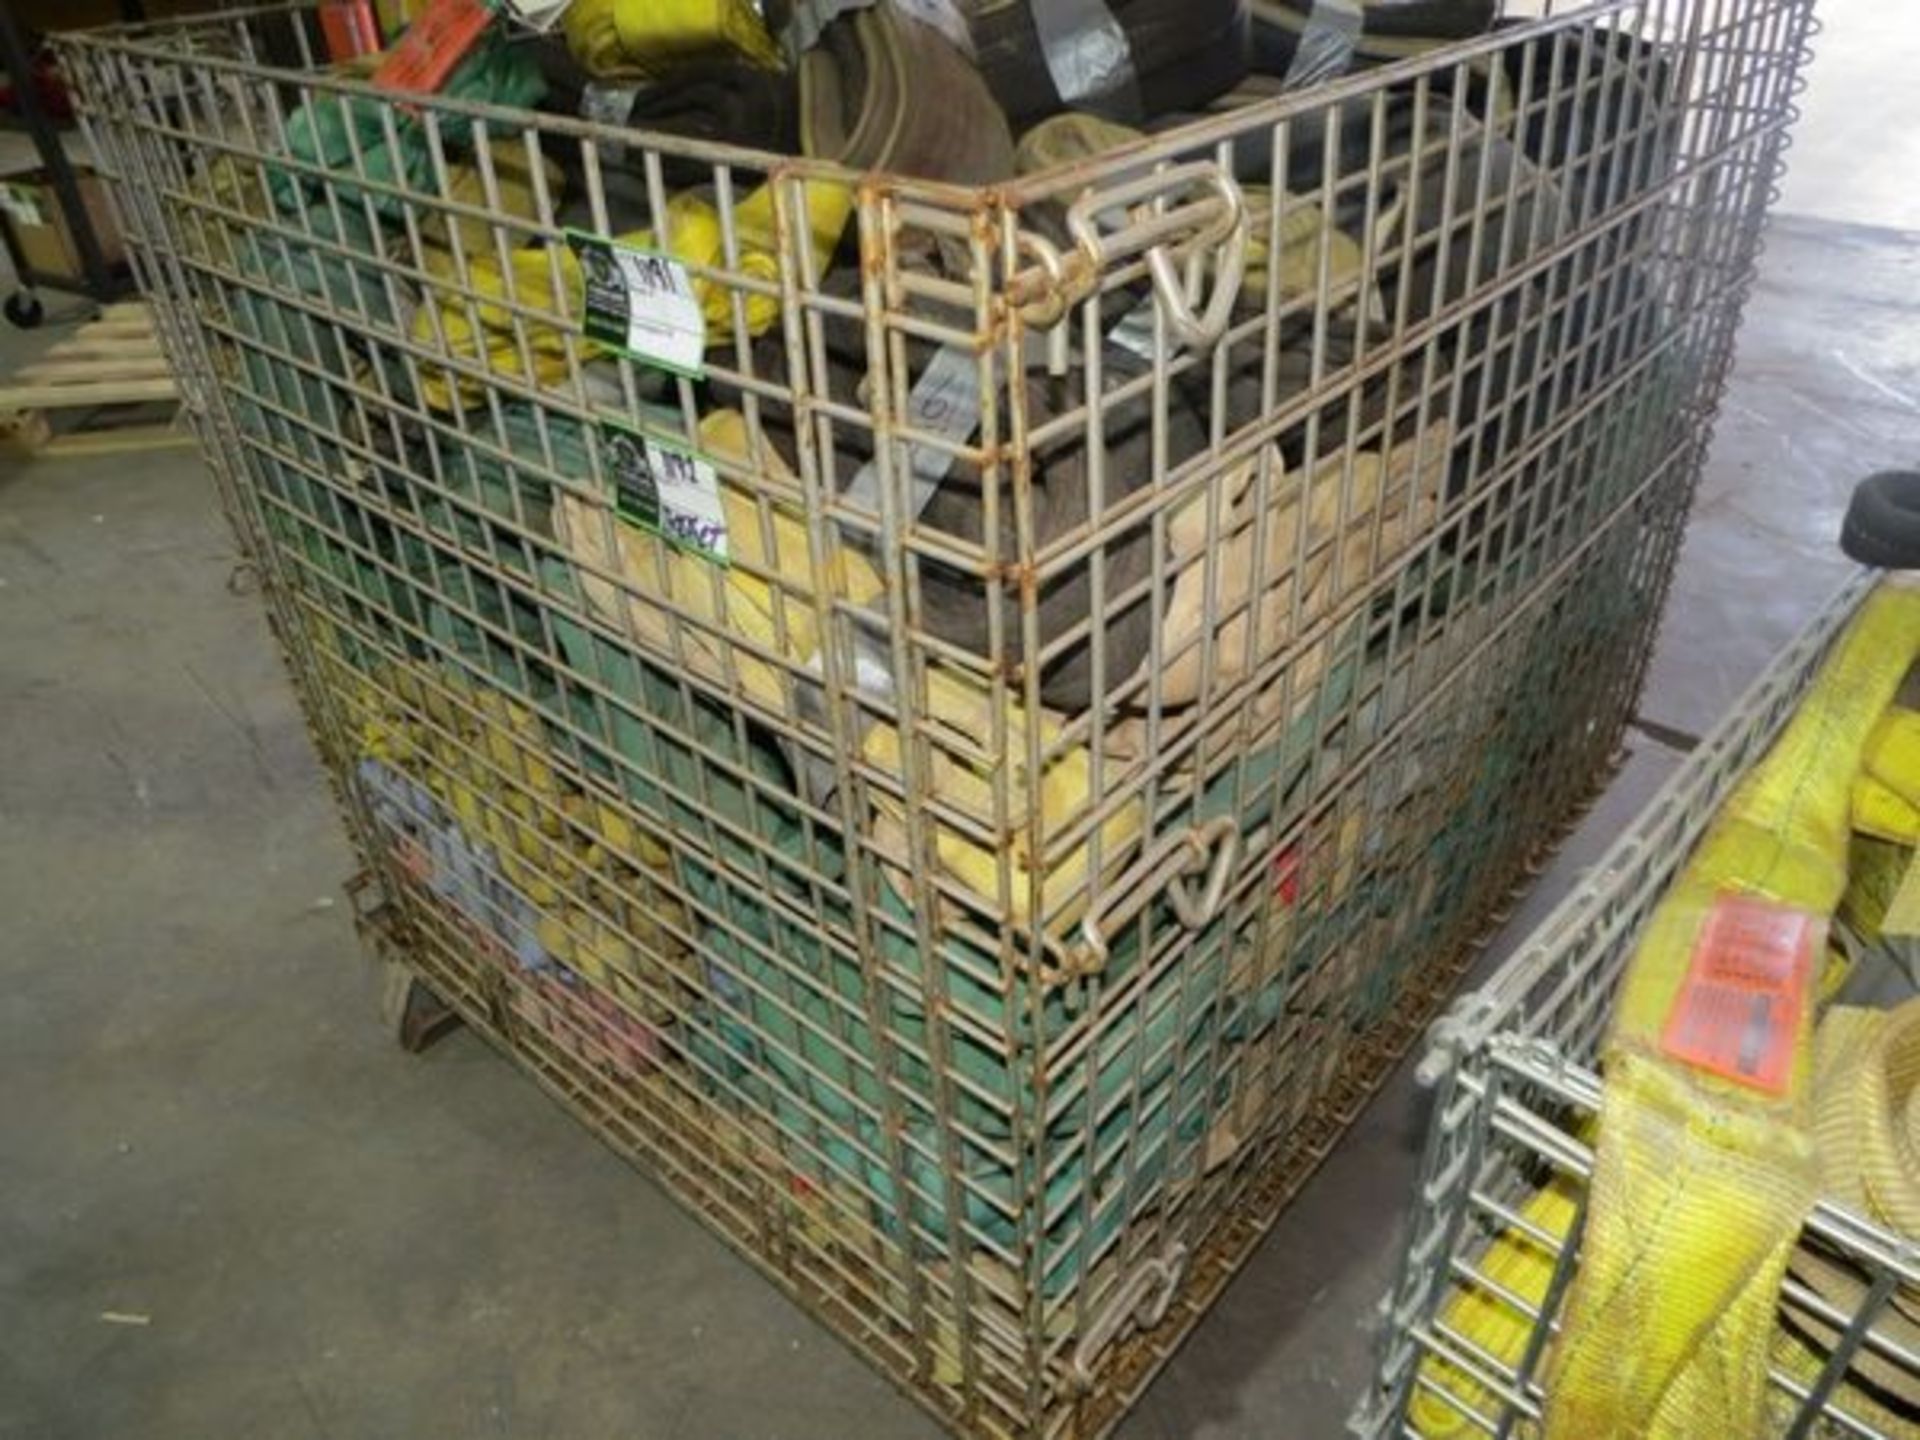 Warehouse Basket- MFR - Unknown 4' x 40" x 42" **Contents SOLD Separately in Lot #1191** - Image 2 of 7